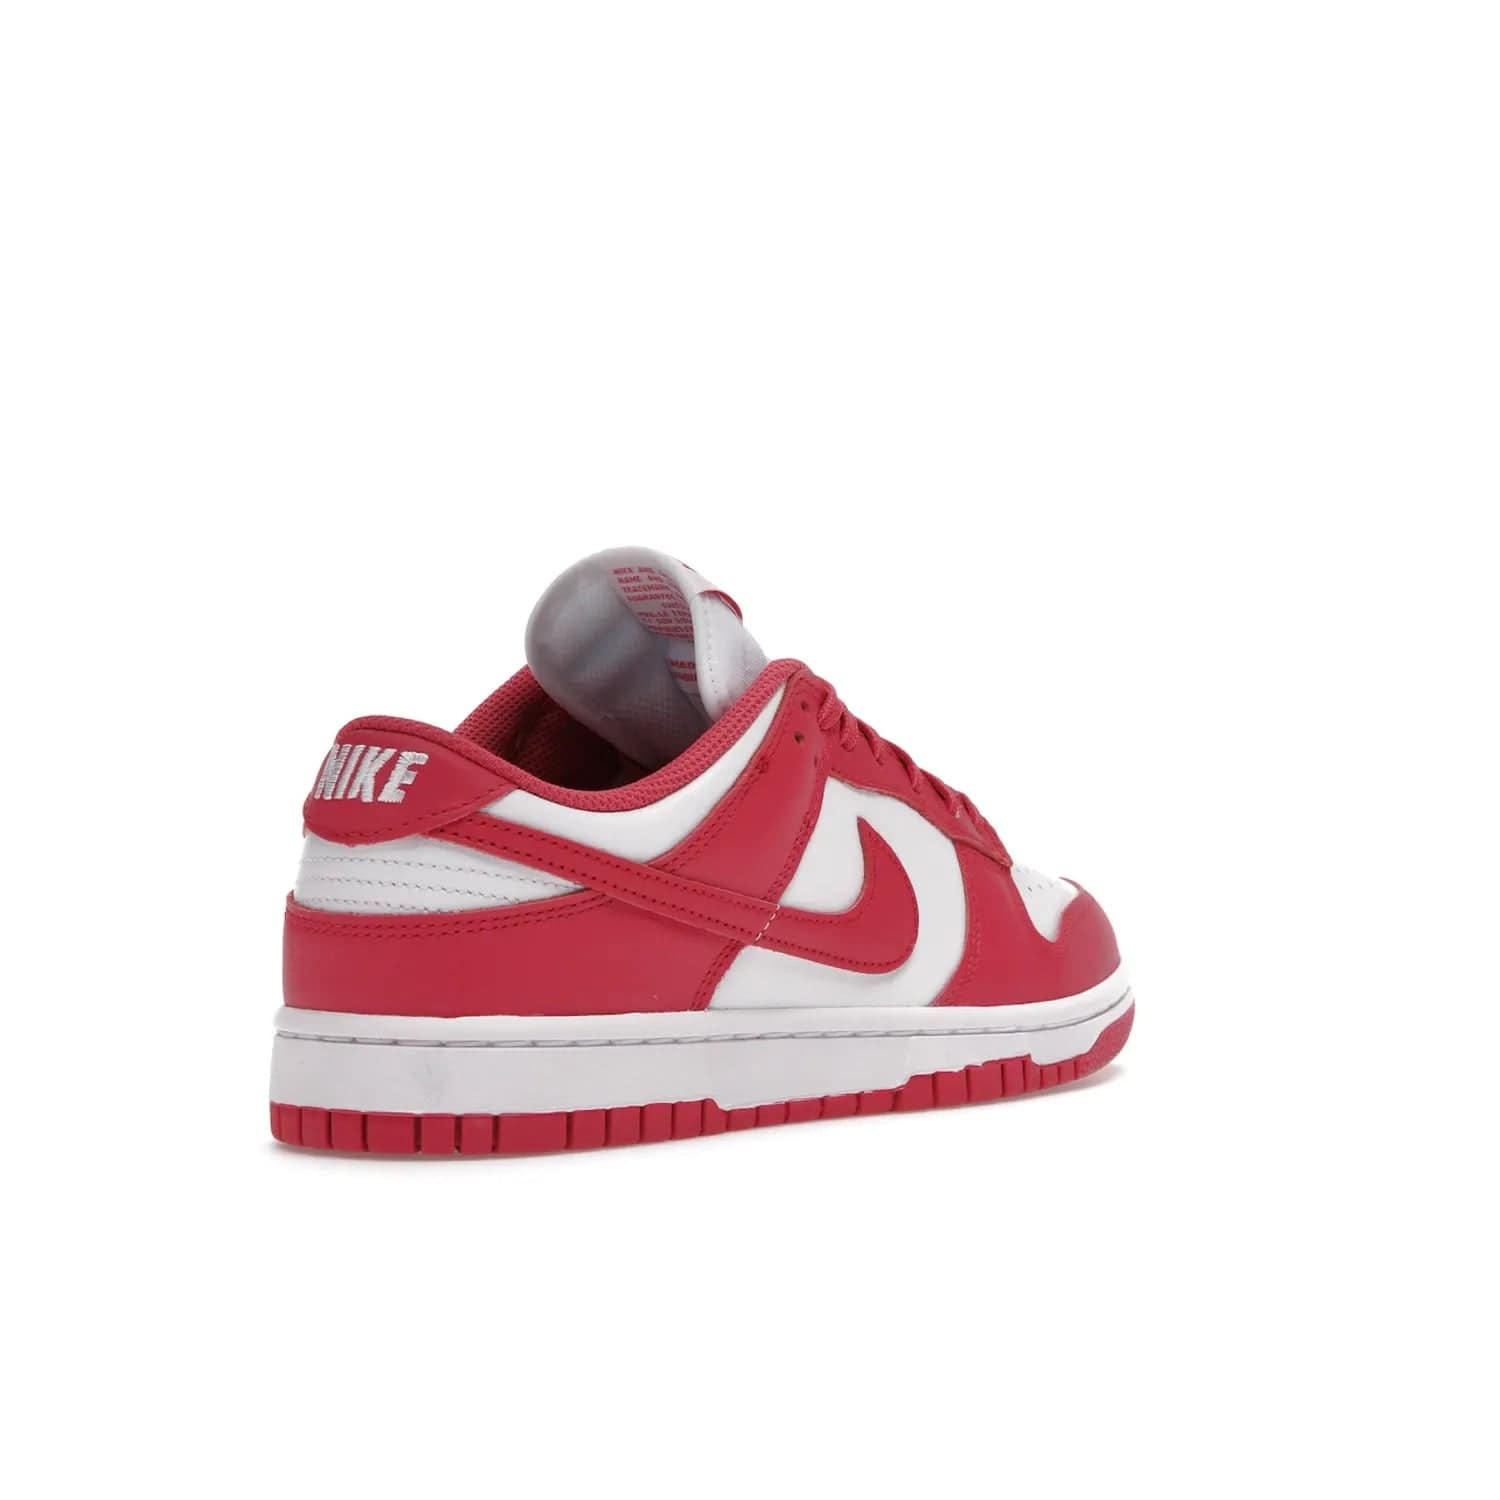 Nike Dunk Low Archeo Pink (Women's) - Image 32 - Only at www.BallersClubKickz.com - Introducing the stylish and comfortable Nike Dunk Low Archeo Pink (Women's). White/Archeo Pink colorway with white leather upper, pink overlays and Swooshes. Get yours now!